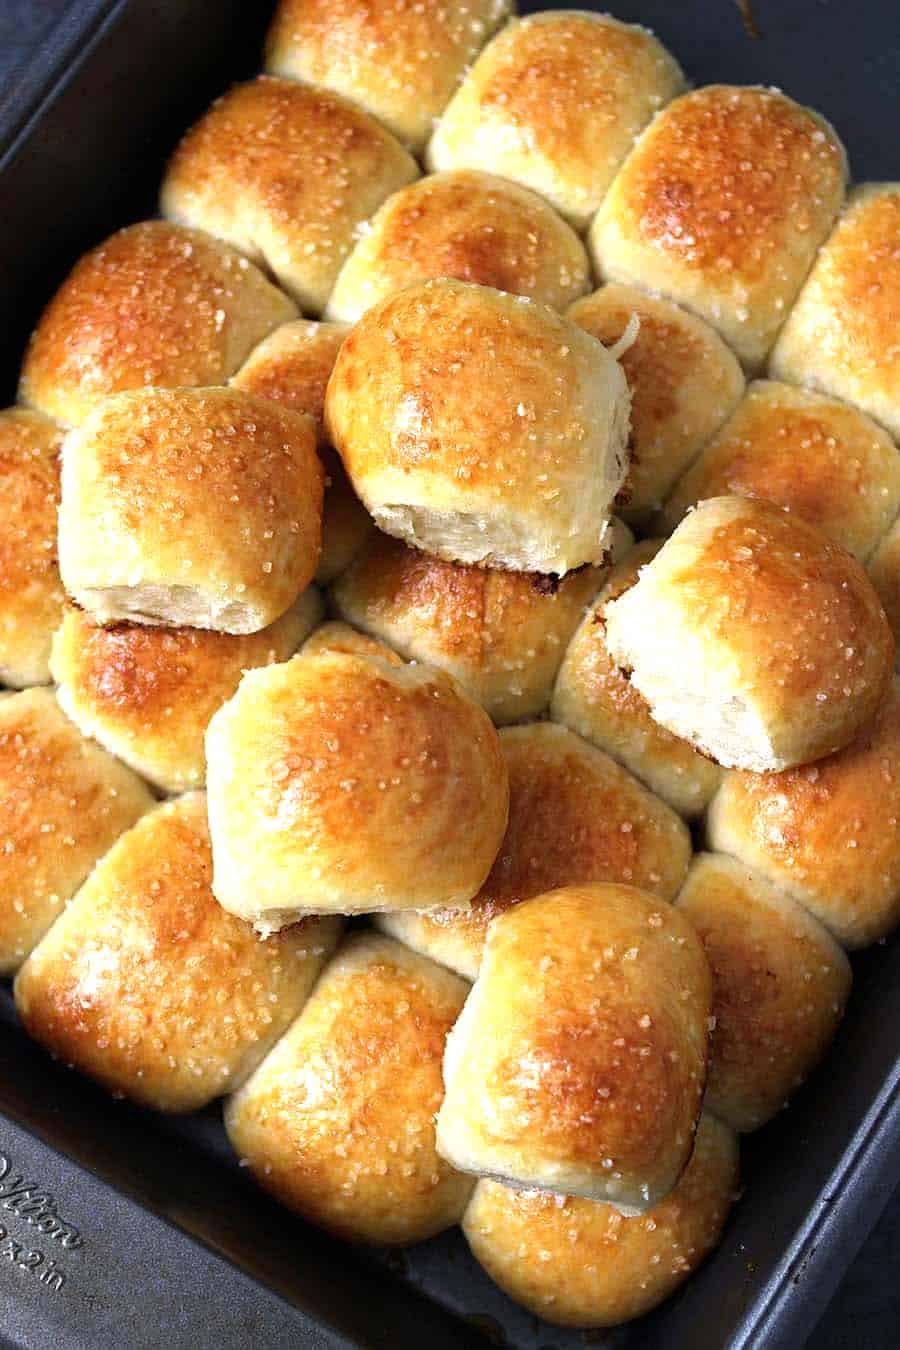 how to make best dinner rolls at home, yeast rolls, holiday bread baking from scratch, pav, #bread